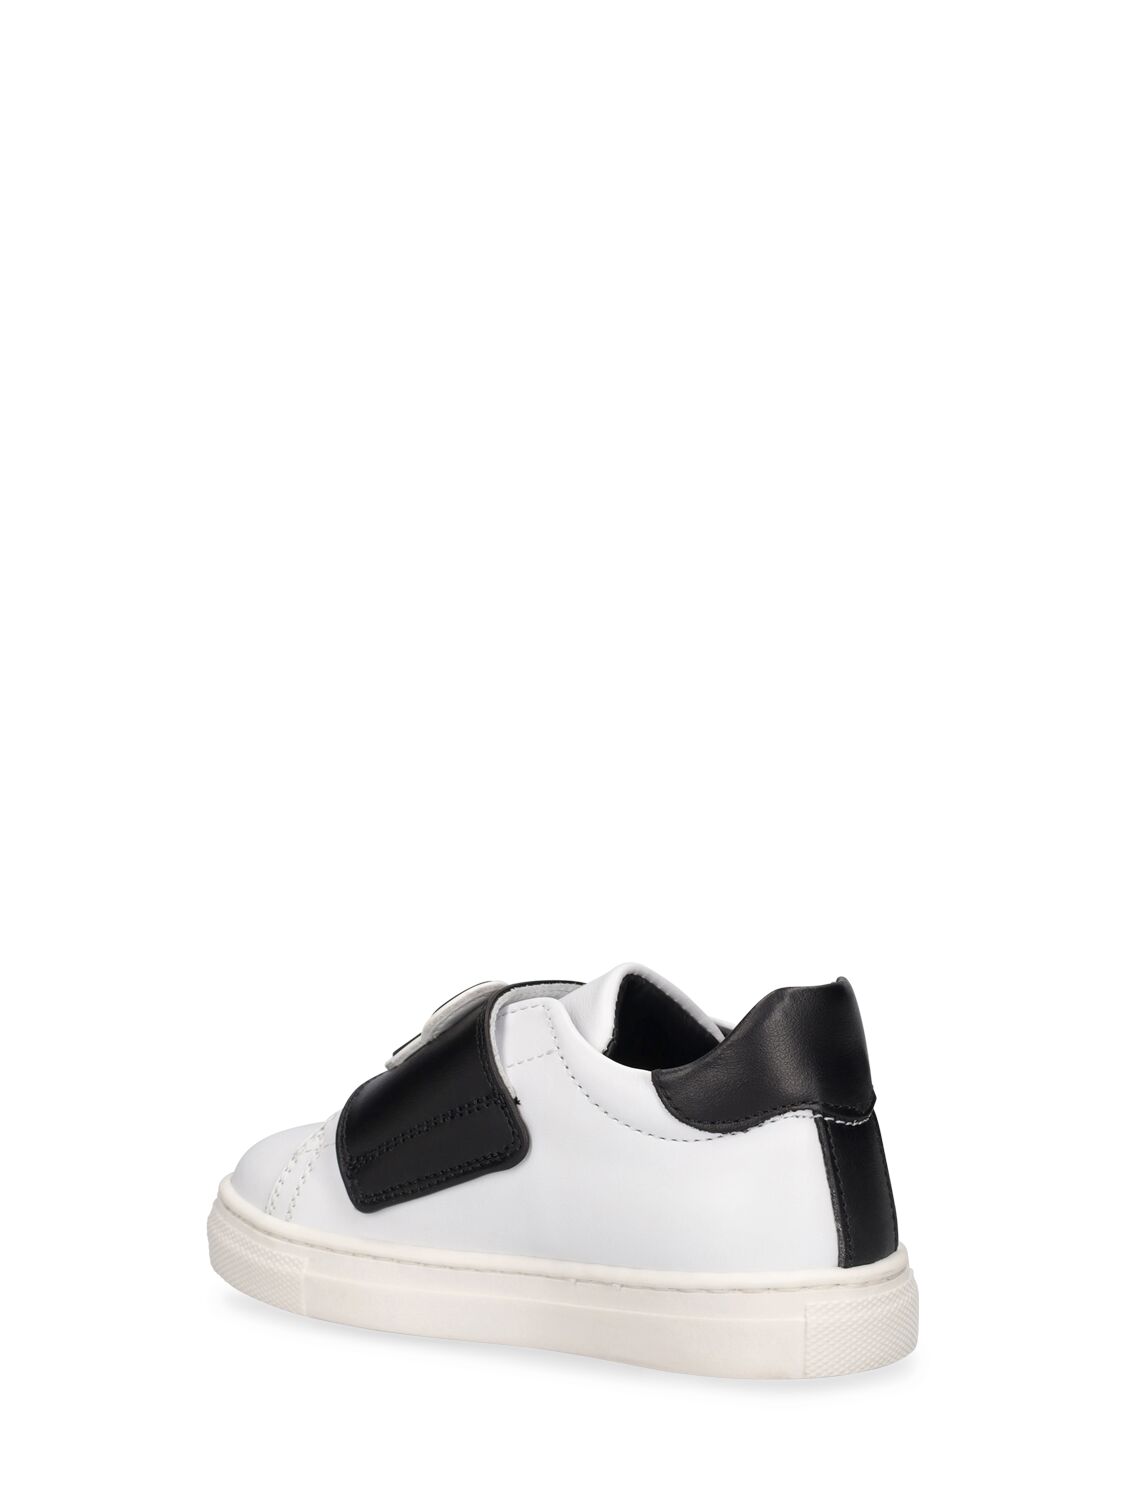 Shop Moschino Leather Strap Sneakers W/ Patches In White,black